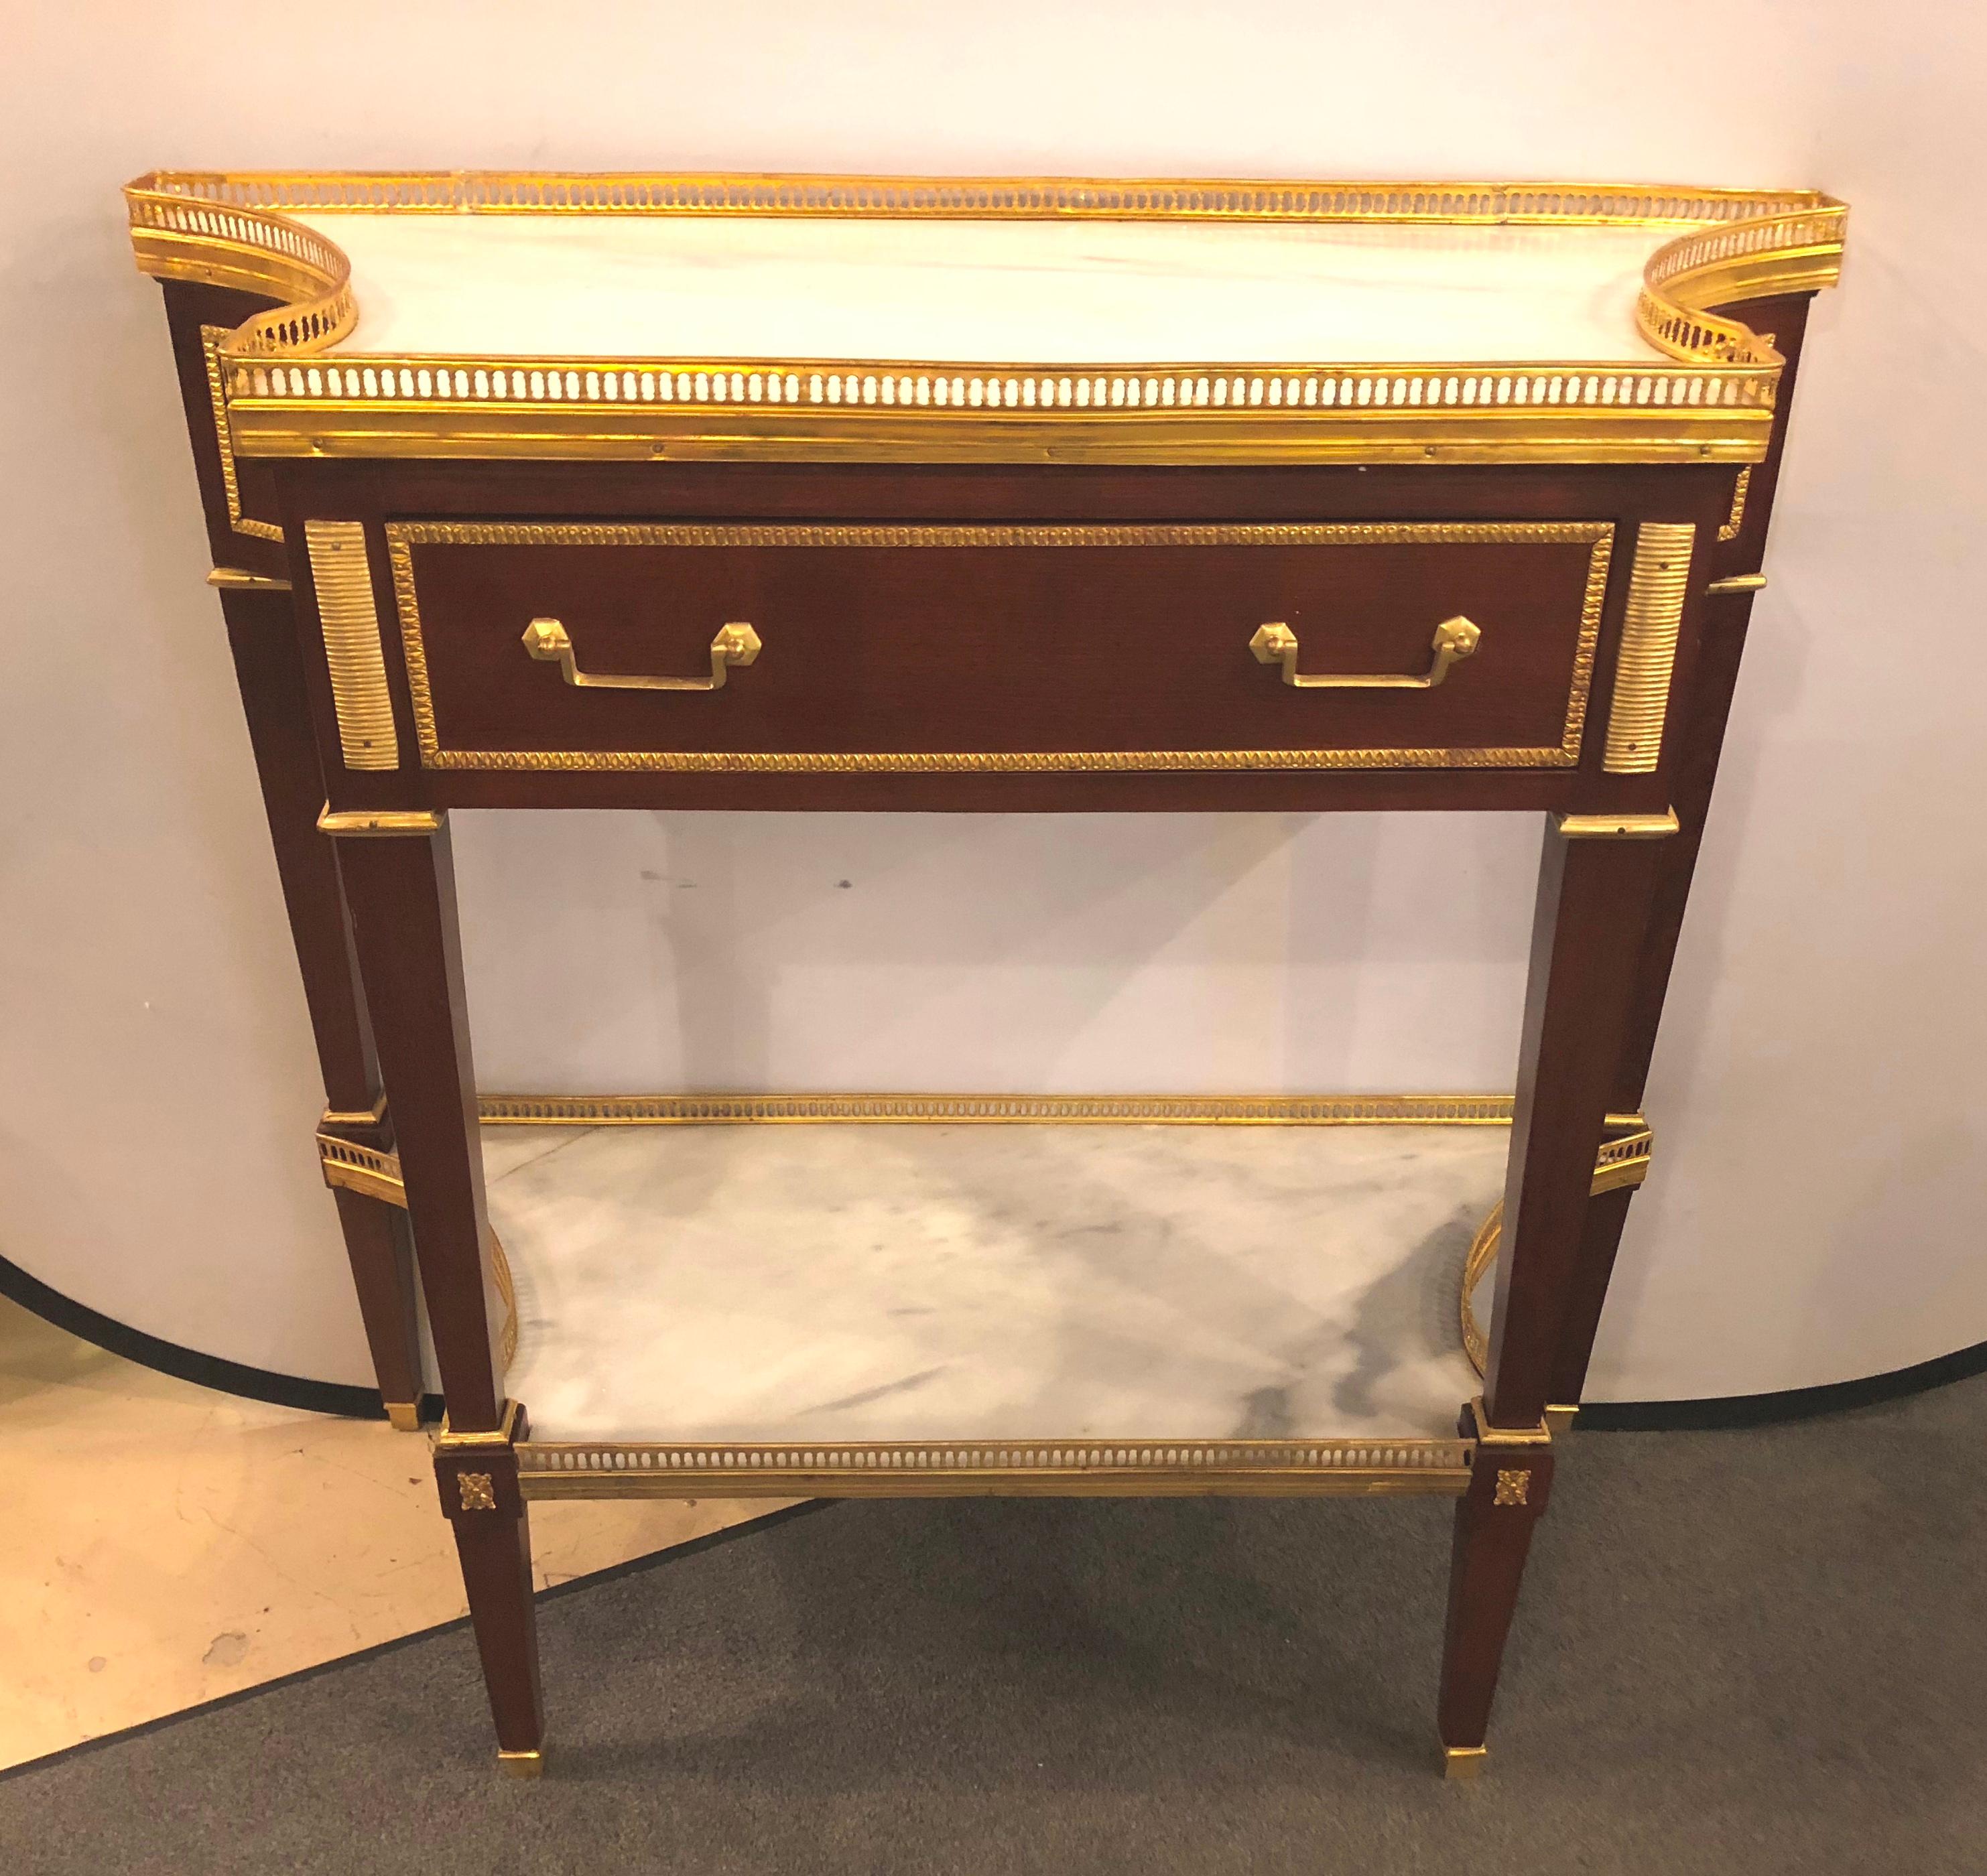 Pair of Russian neoclassical style consoles with inverted sides and marble tops. These fine Maison Jansen inspired console tables or serving tables depict the glamour of the Hollywood Regency era at its height. Each having tapering legs with bronze